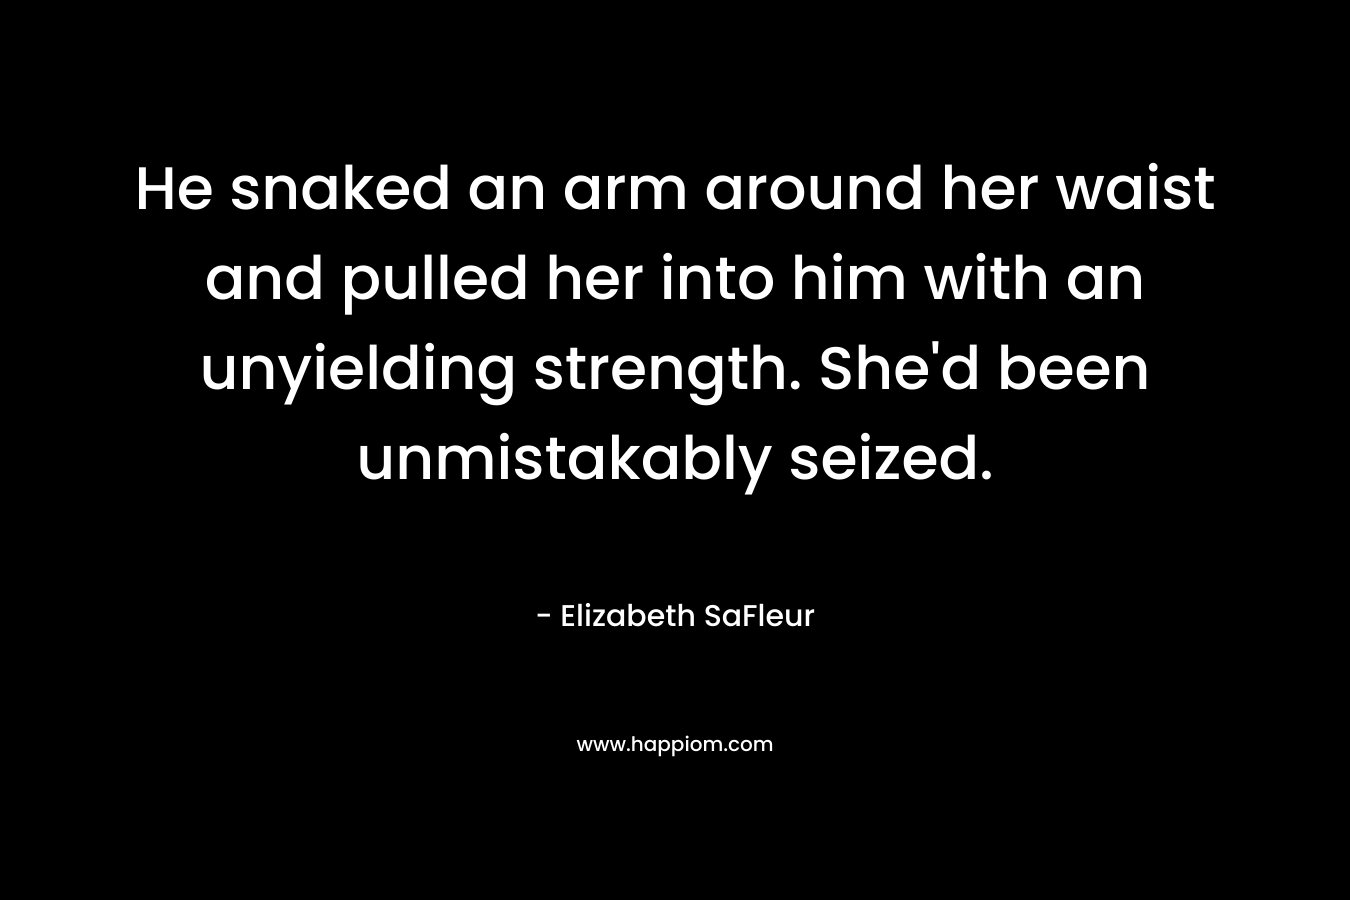 He snaked an arm around her waist and pulled her into him with an unyielding strength. She’d been unmistakably seized. – Elizabeth SaFleur